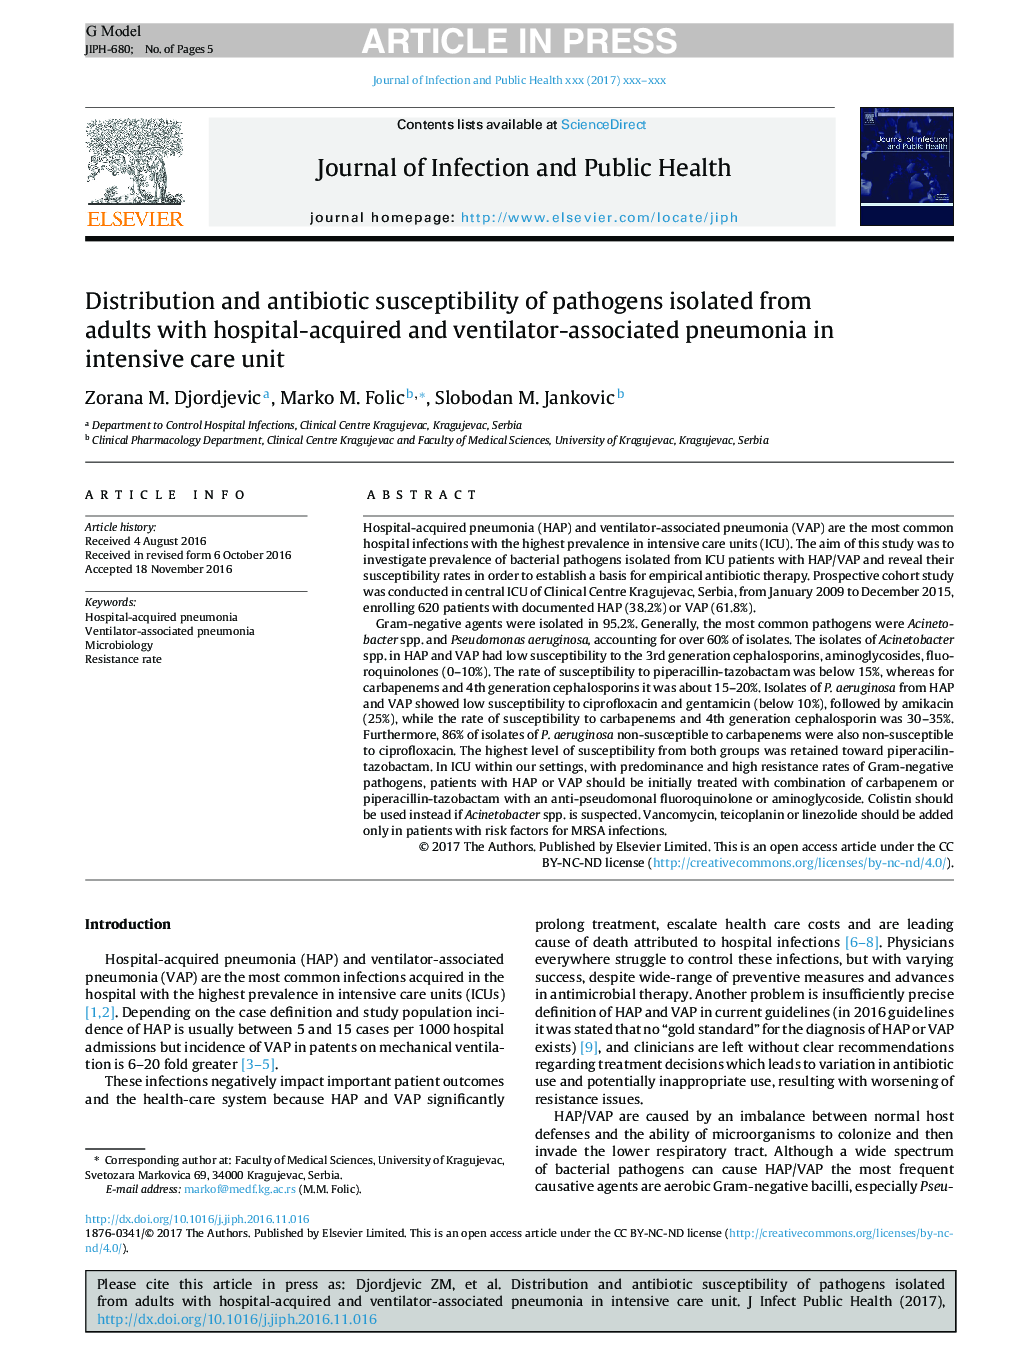 Distribution and antibiotic susceptibility of pathogens isolated from adults with hospital-acquired and ventilator-associated pneumonia in intensive care unit